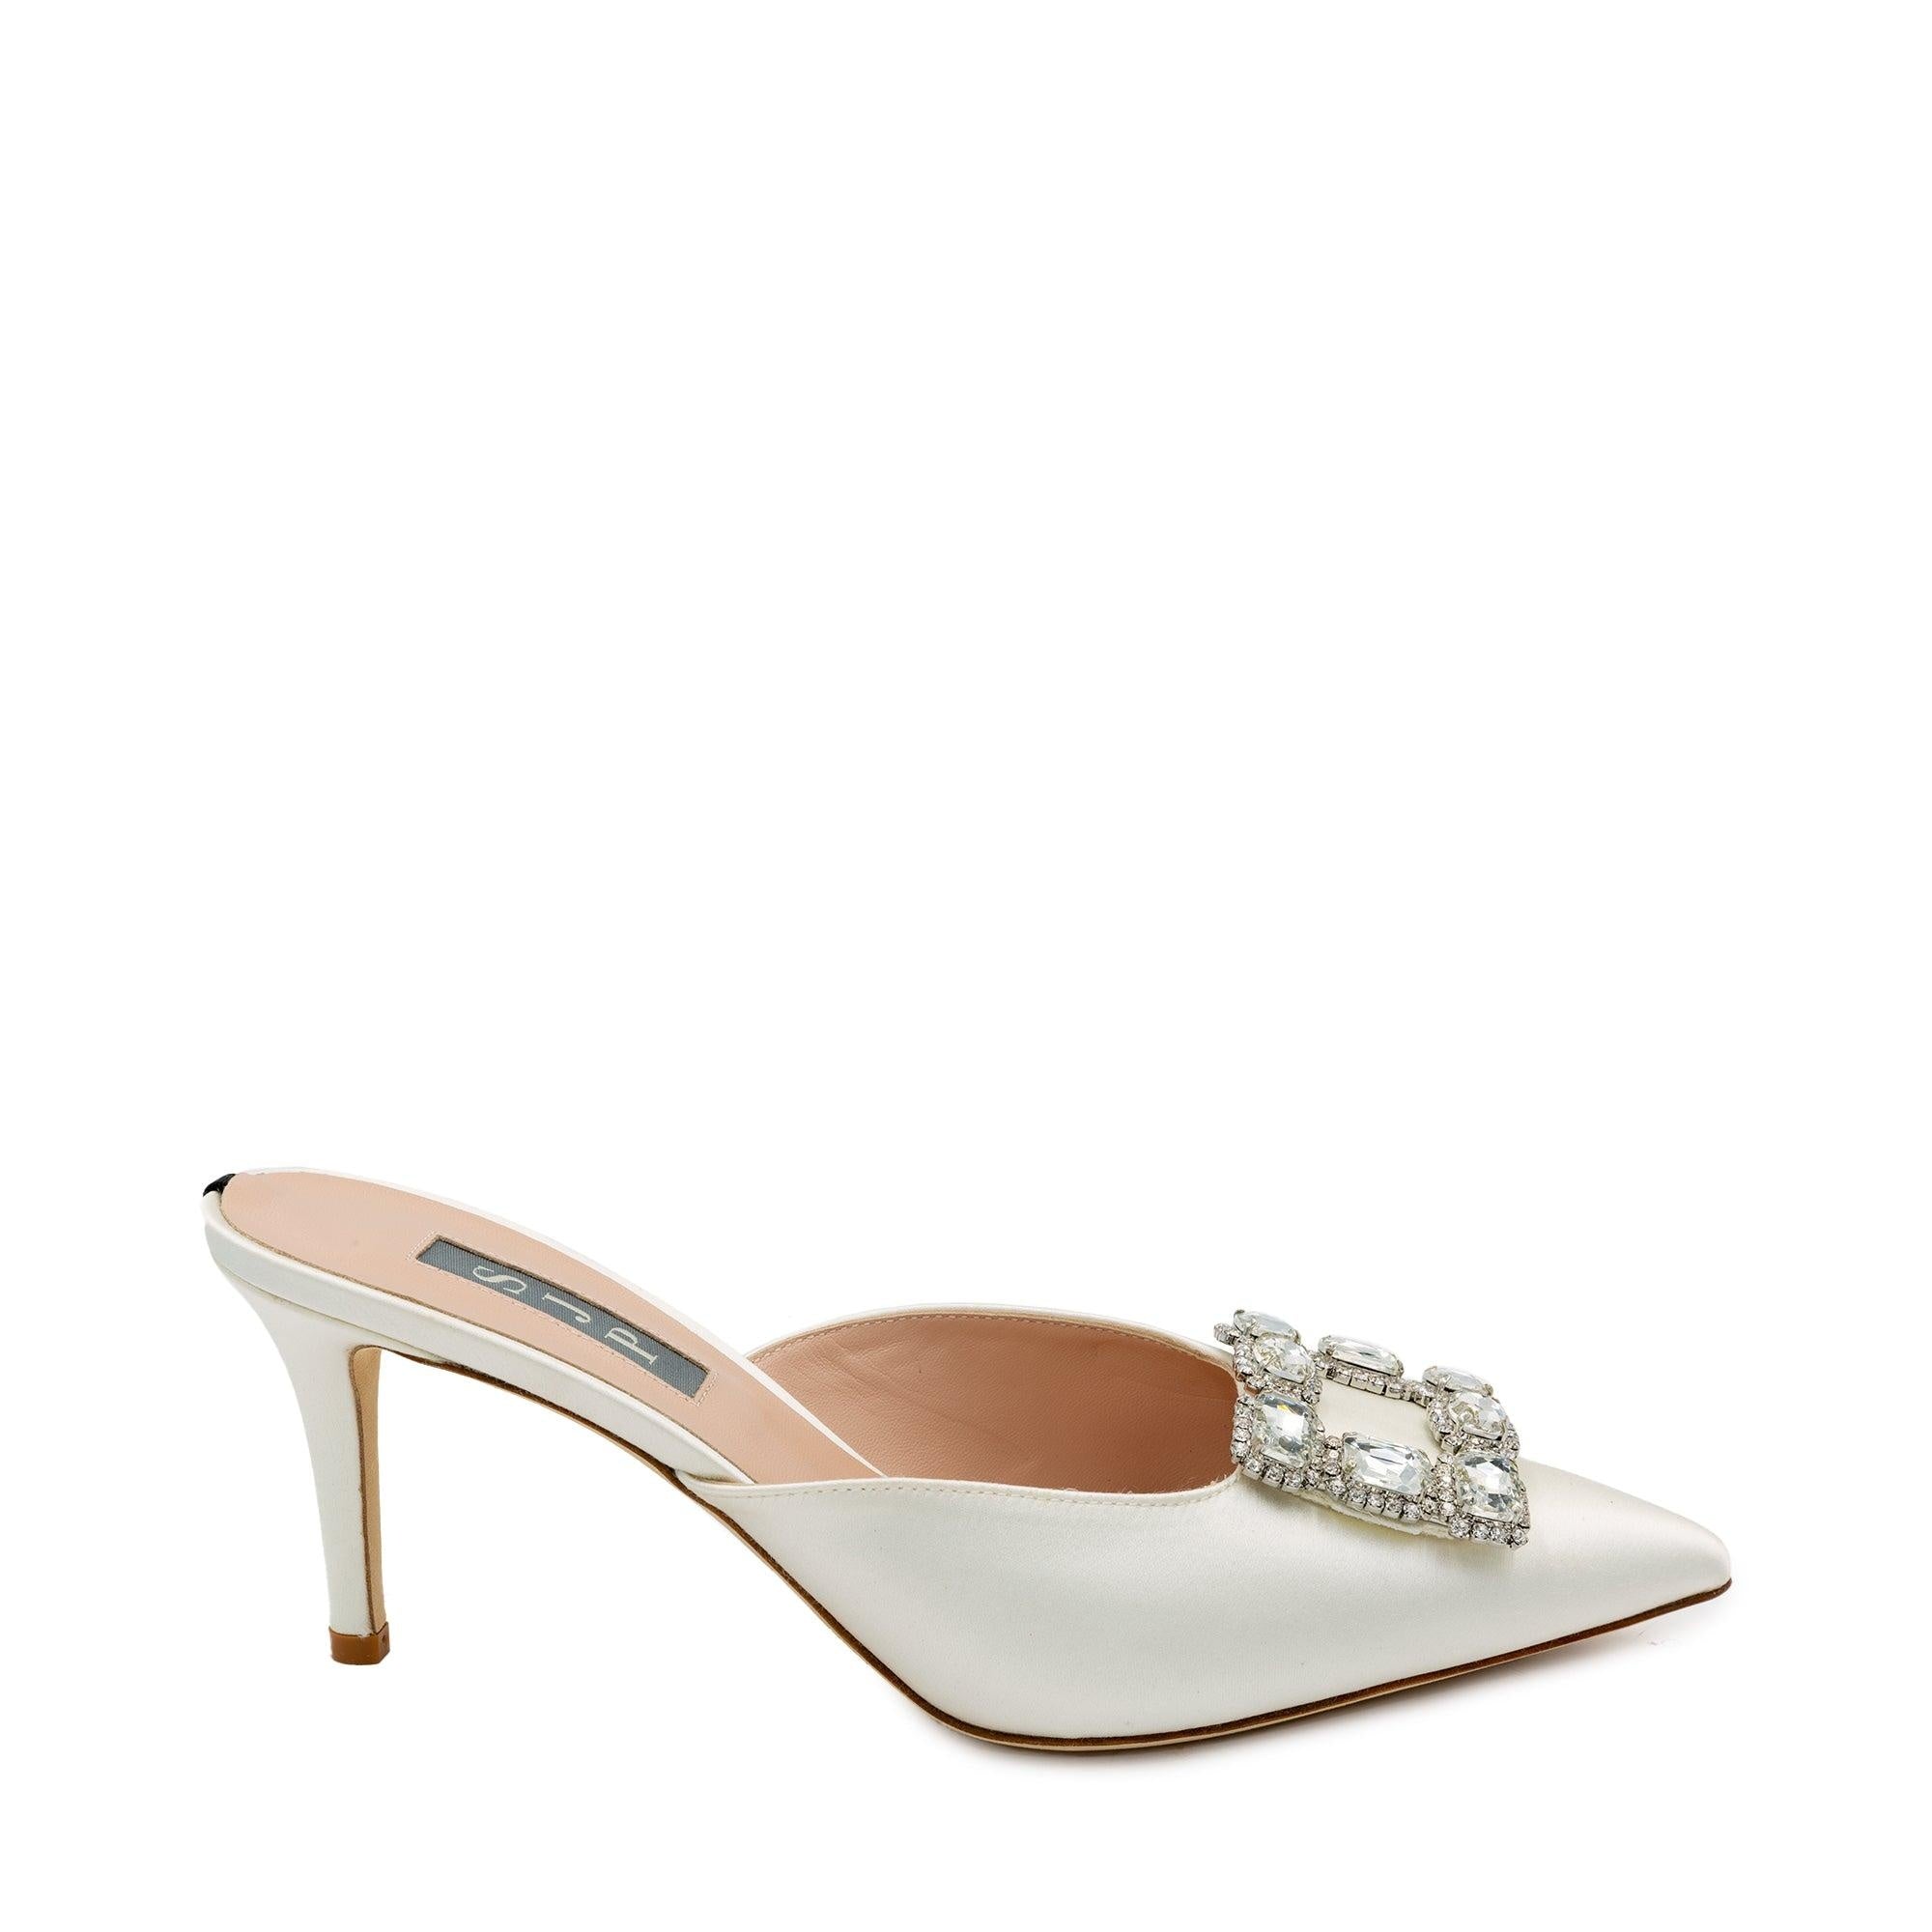 Buy SJP by Sarah Jessica Parker Rafi Ivory Satin Mules 70mm Online